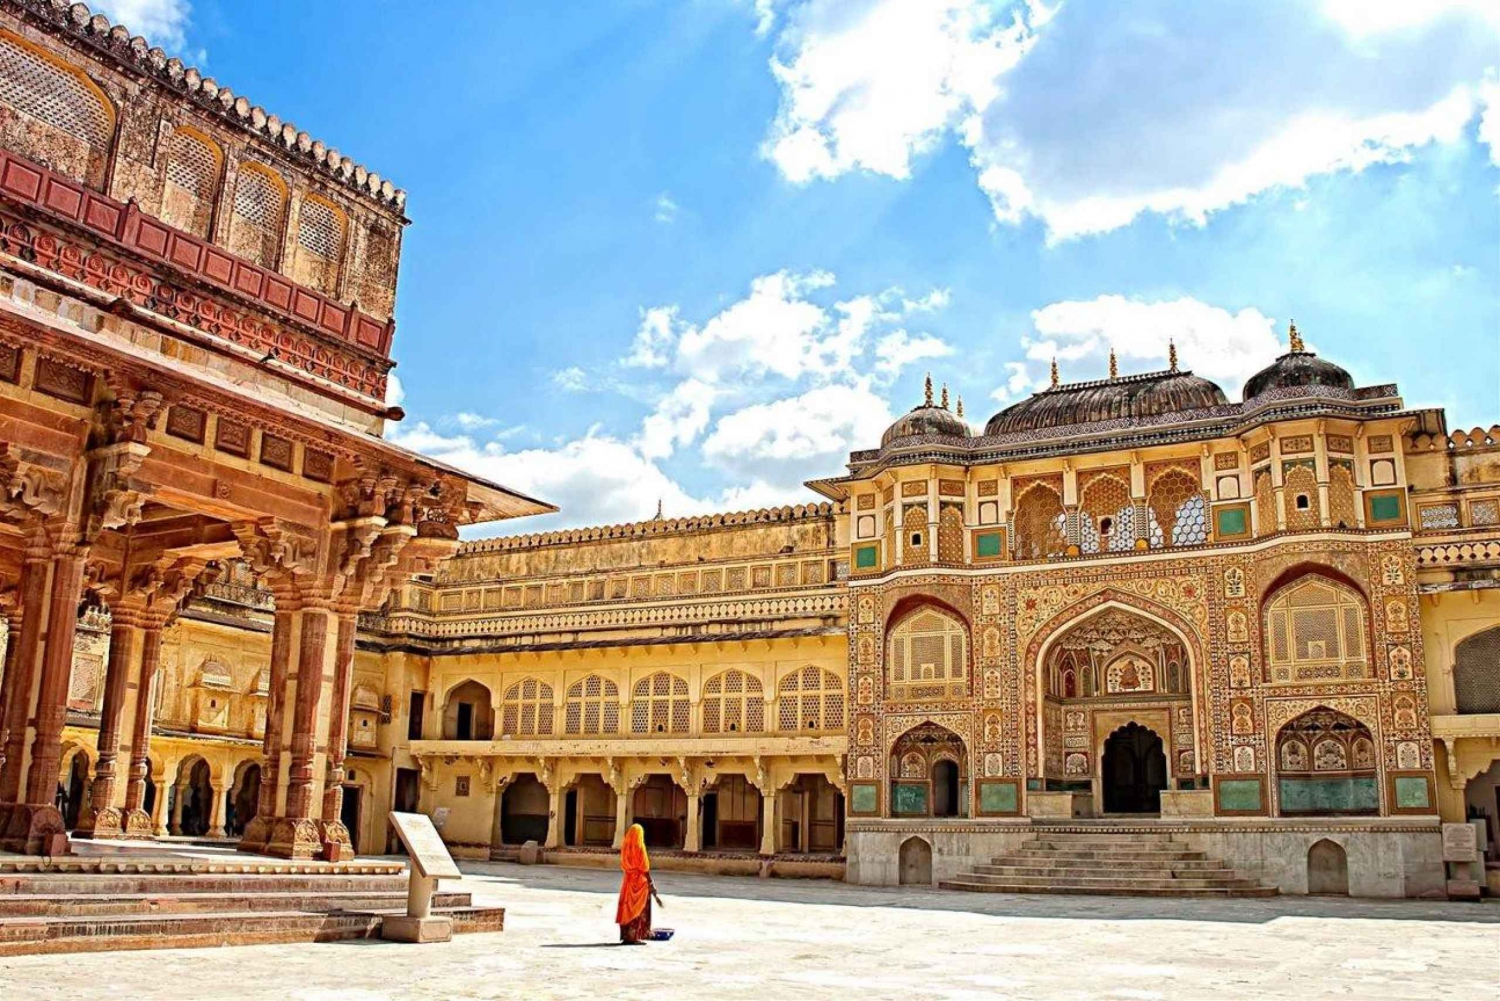 From Jaipur: Full day Jaipur tour with Tour Guide and Cab